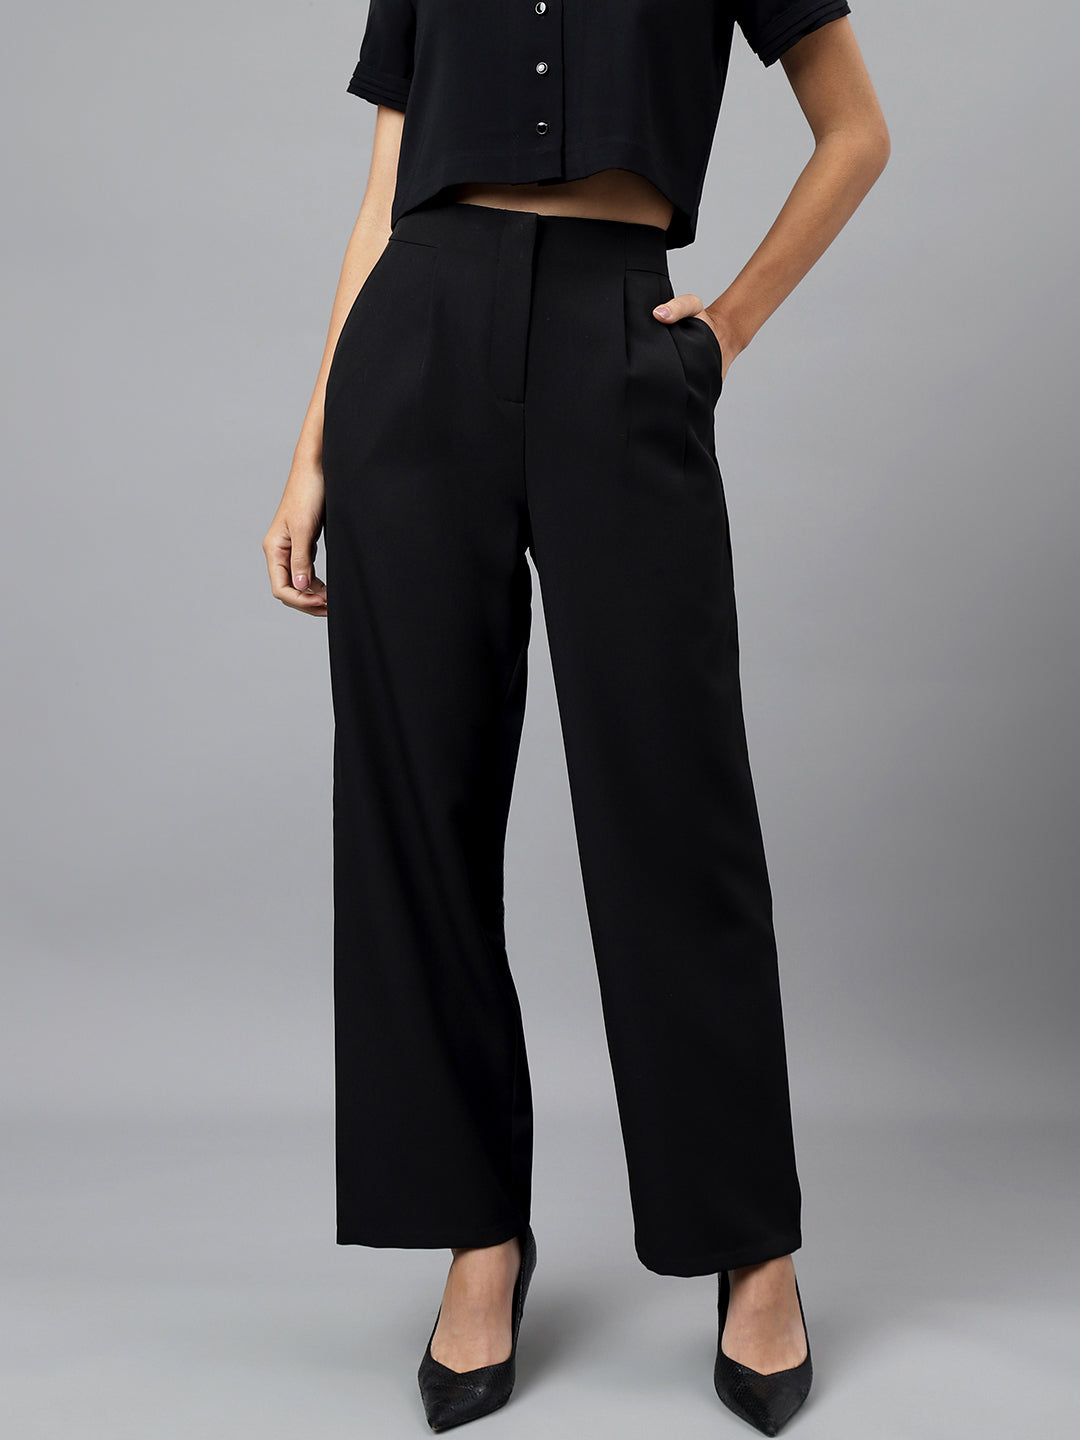 Black Solid Straight Pant